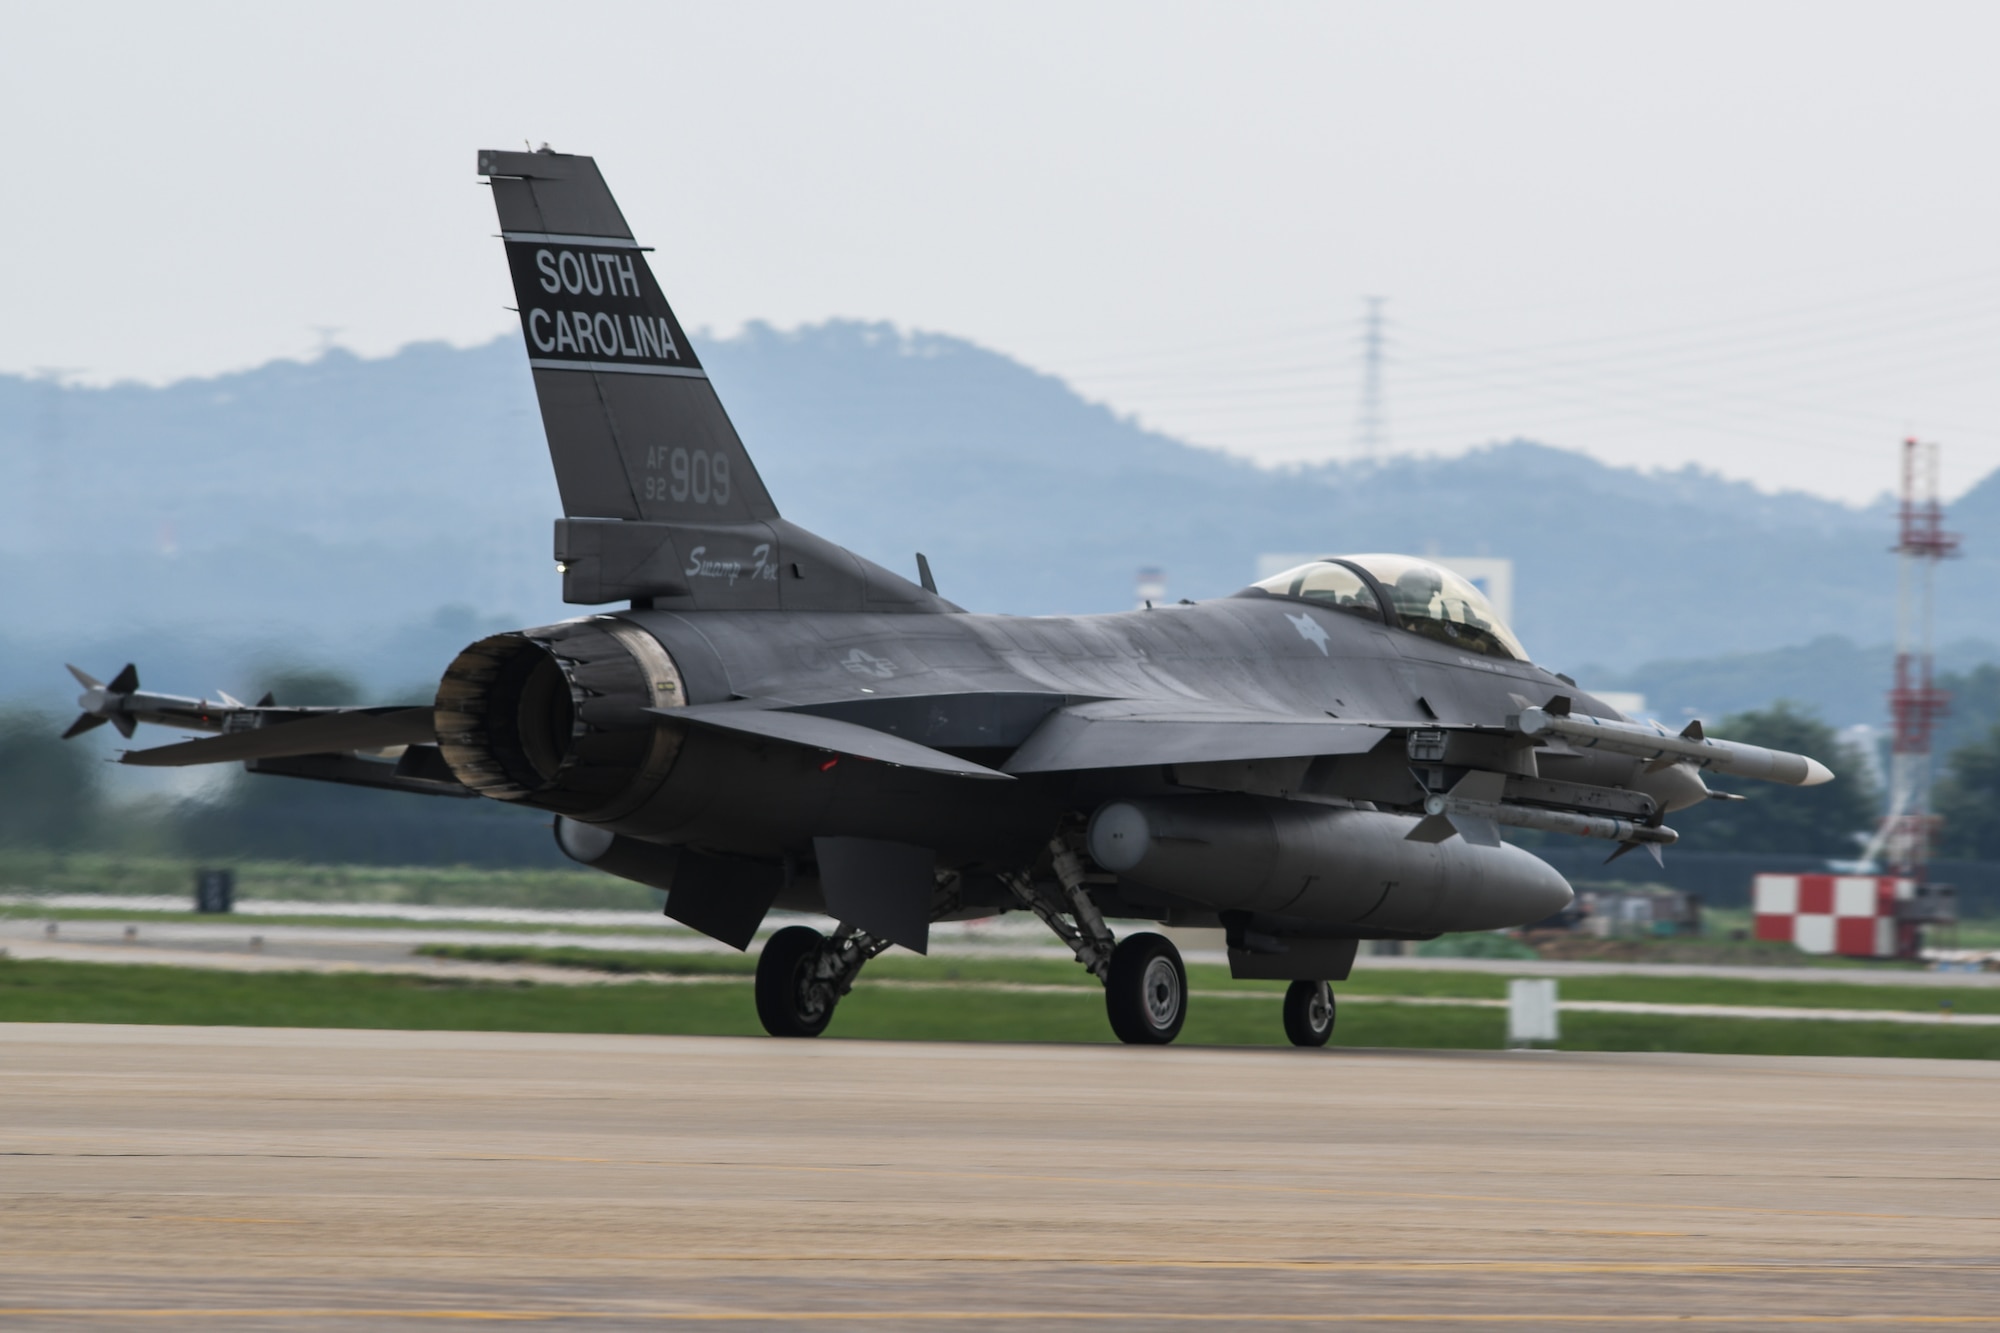 An F-16 Fighting Falcon from the South Carolina Air National Guard’s 157th Expeditionary Fighter Squadron taxis on the flightline before takeoff July 27, 2016, at Osan Air Base, Republic of Korea. Approximately 300 Airmen and 12 F-16s from the 169th Fighter Wing deployed to Osan in support of the U.S. Pacific Command Theater Security Package.  (U.S. Air Force photo by Senior Airman Dillian Bamman)